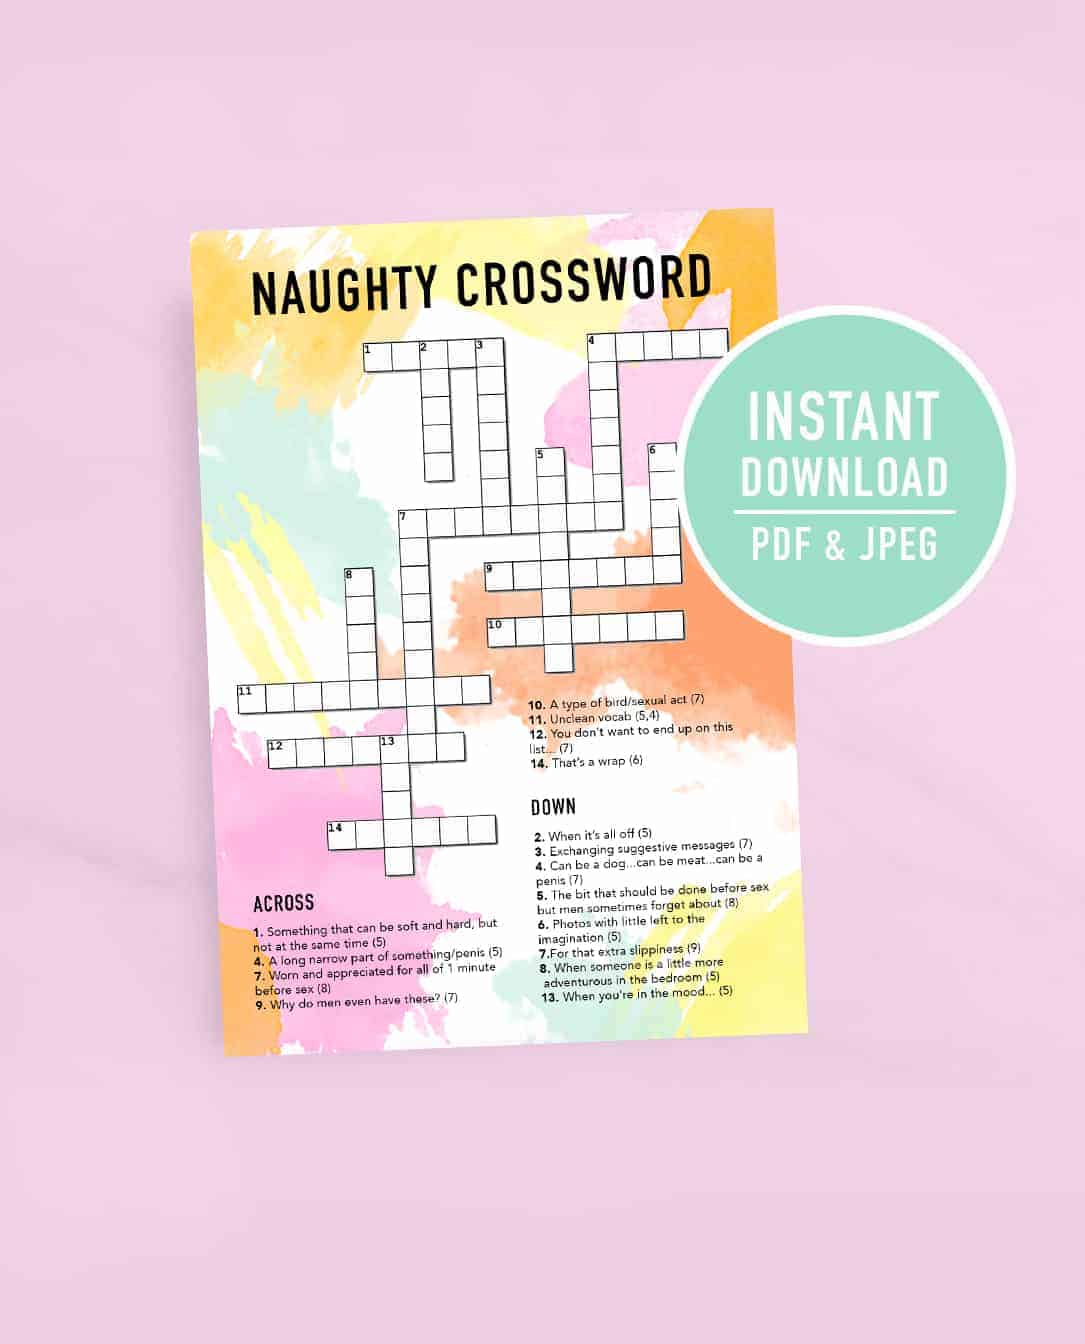 PRINT THIS NAUGHTY CROSSWORD GAME FOR A FUN BACHELORETTE PARTY ACTIVITY!